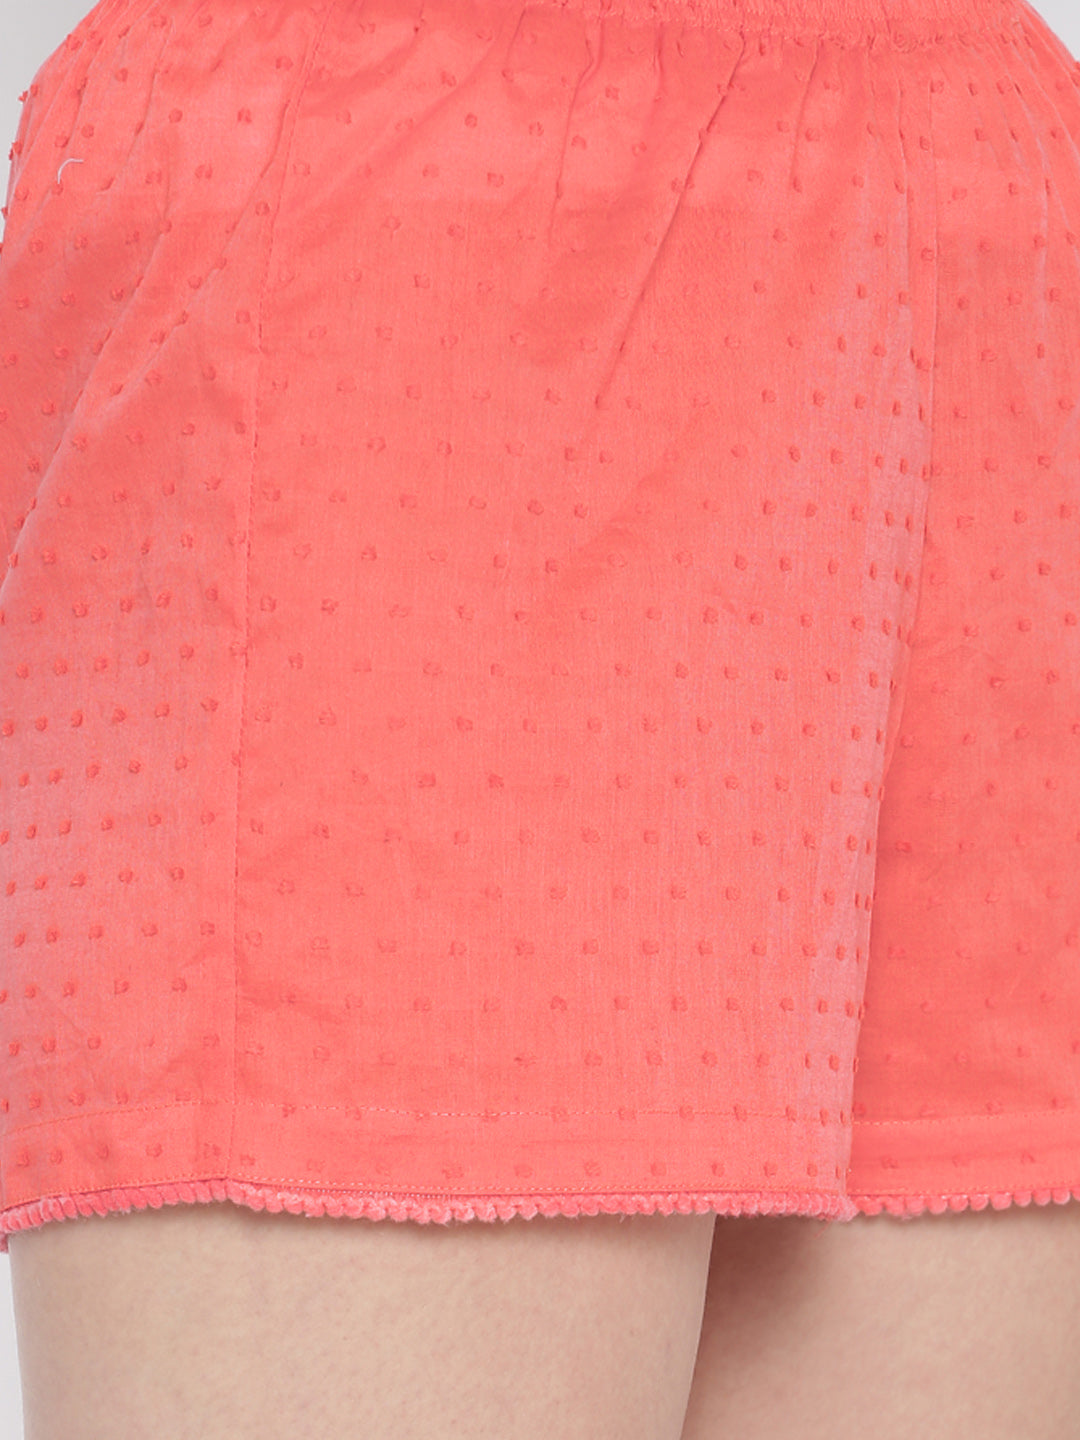 S48-Lounge Shorts (Coral) - Clt.s